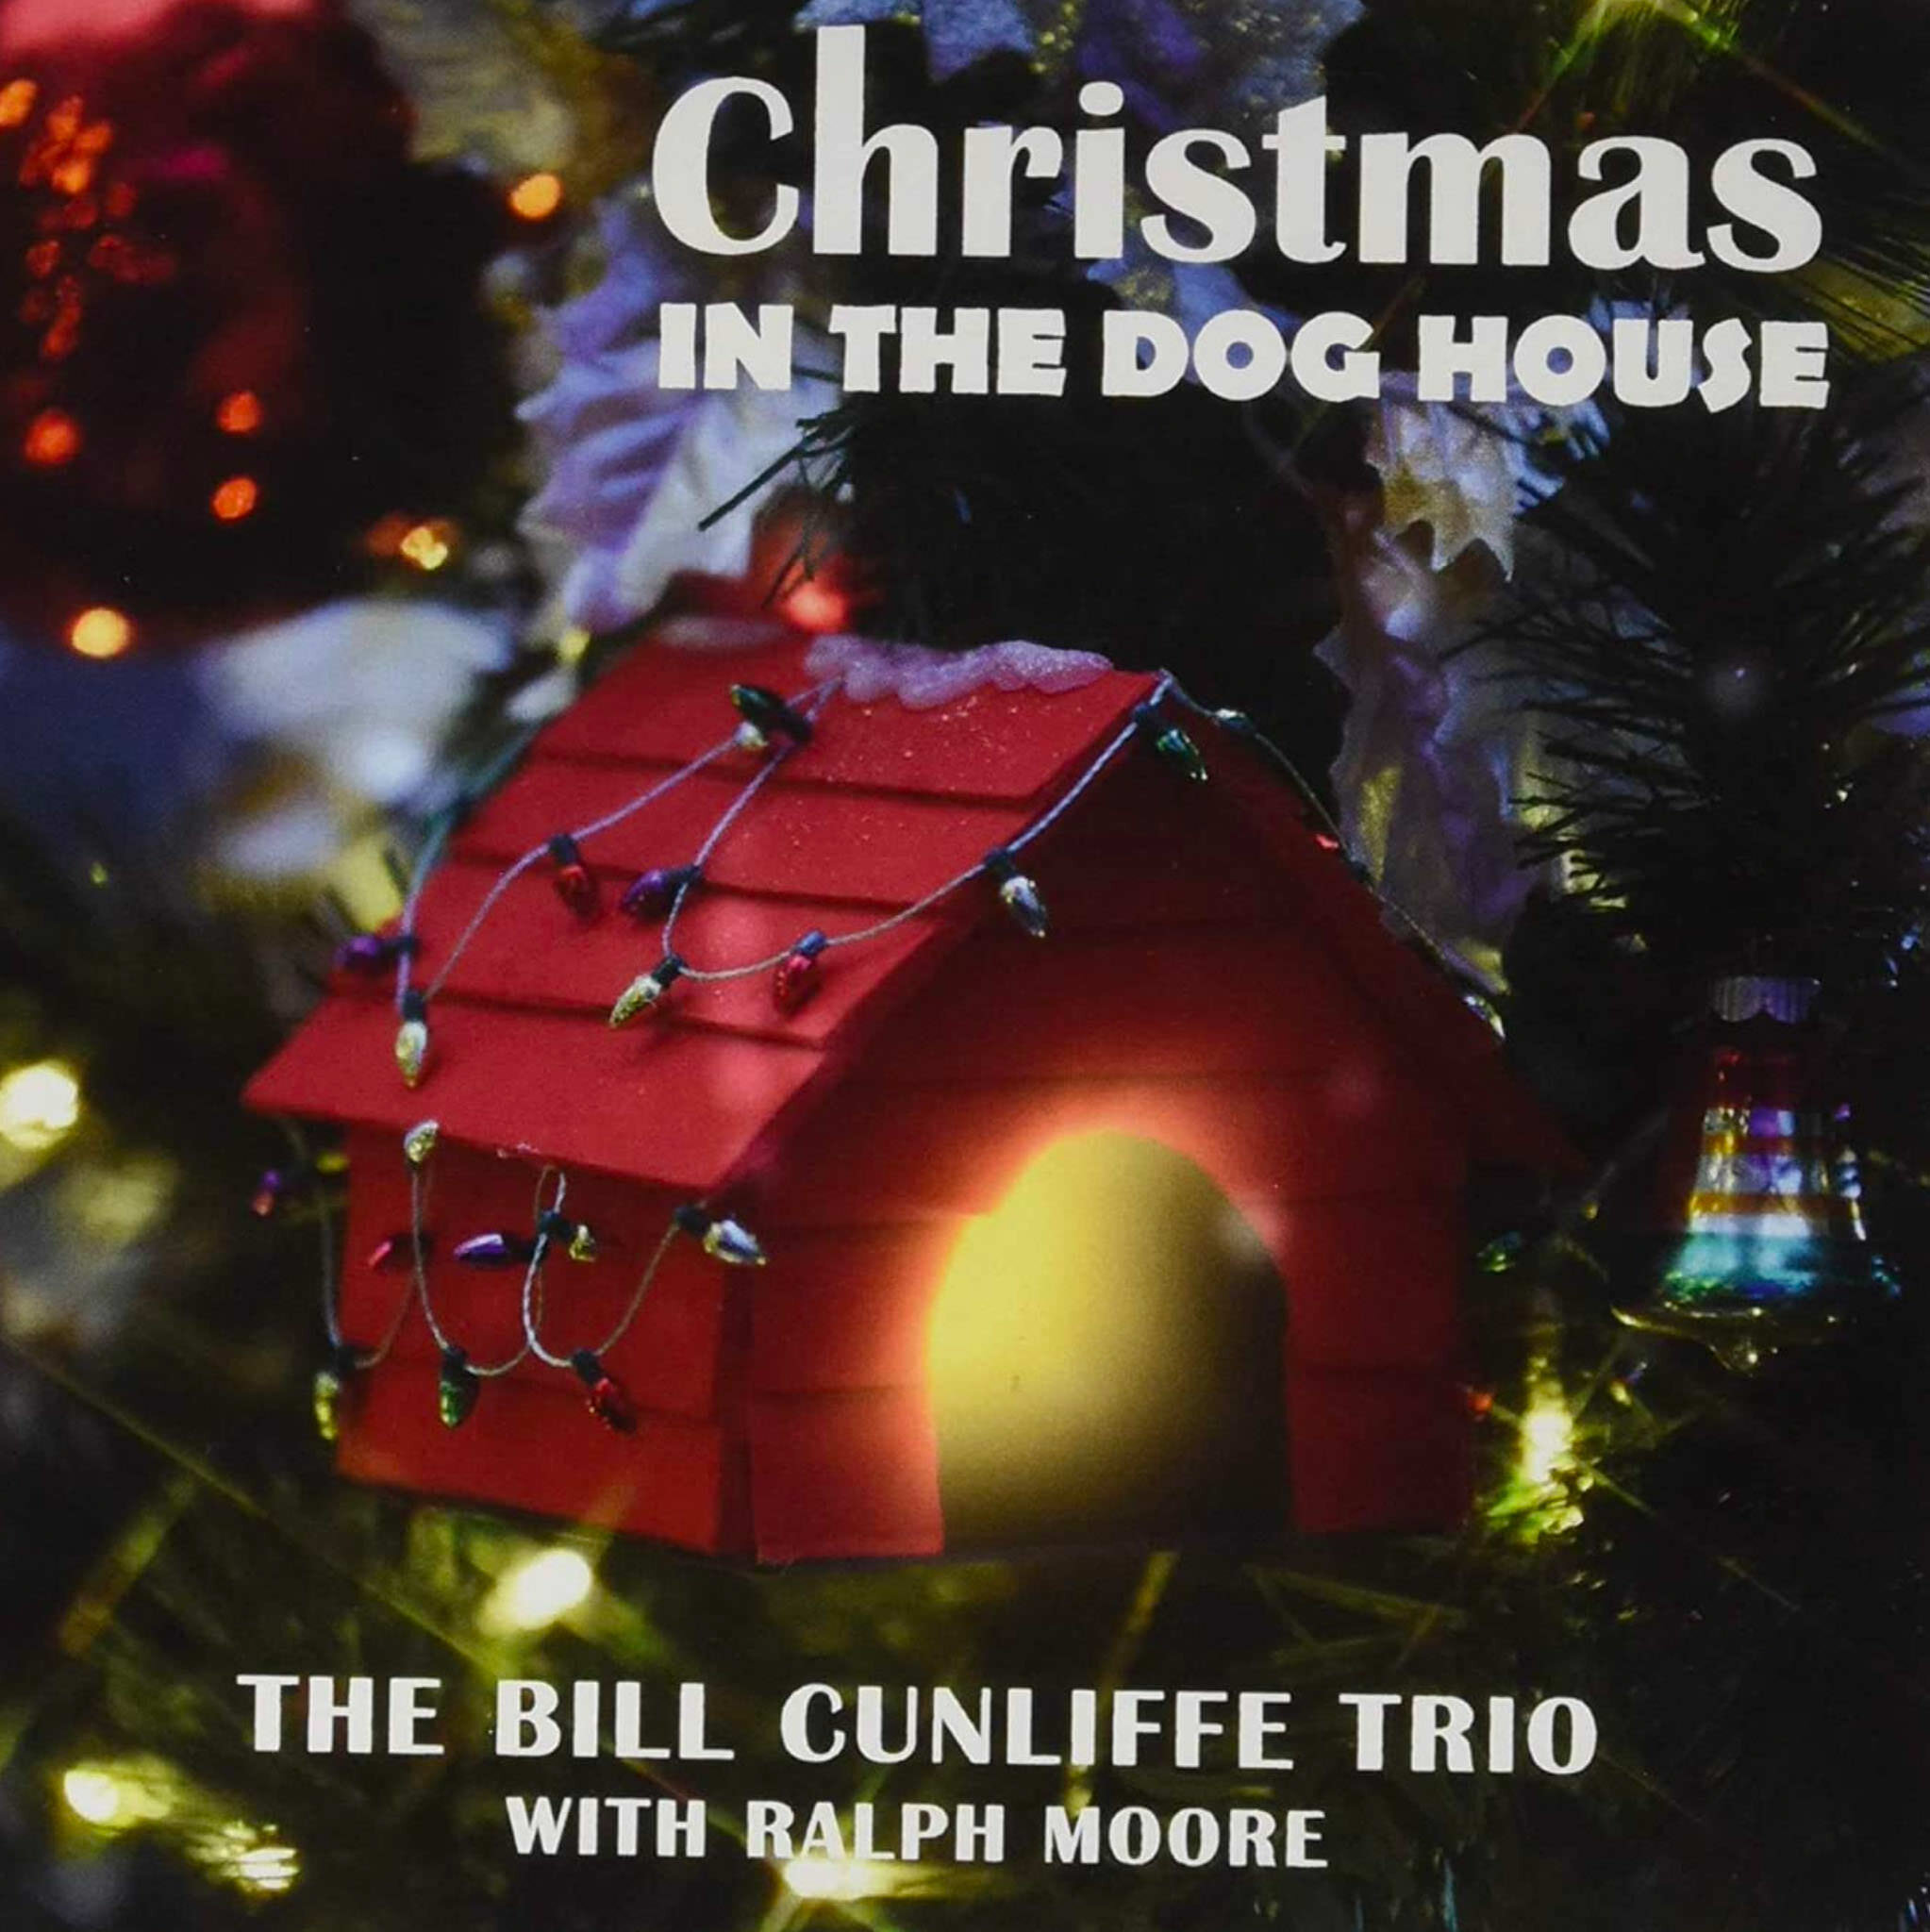 christmas-in-the-dog-house-bill-cunliffe-trio-2019-1.jpg